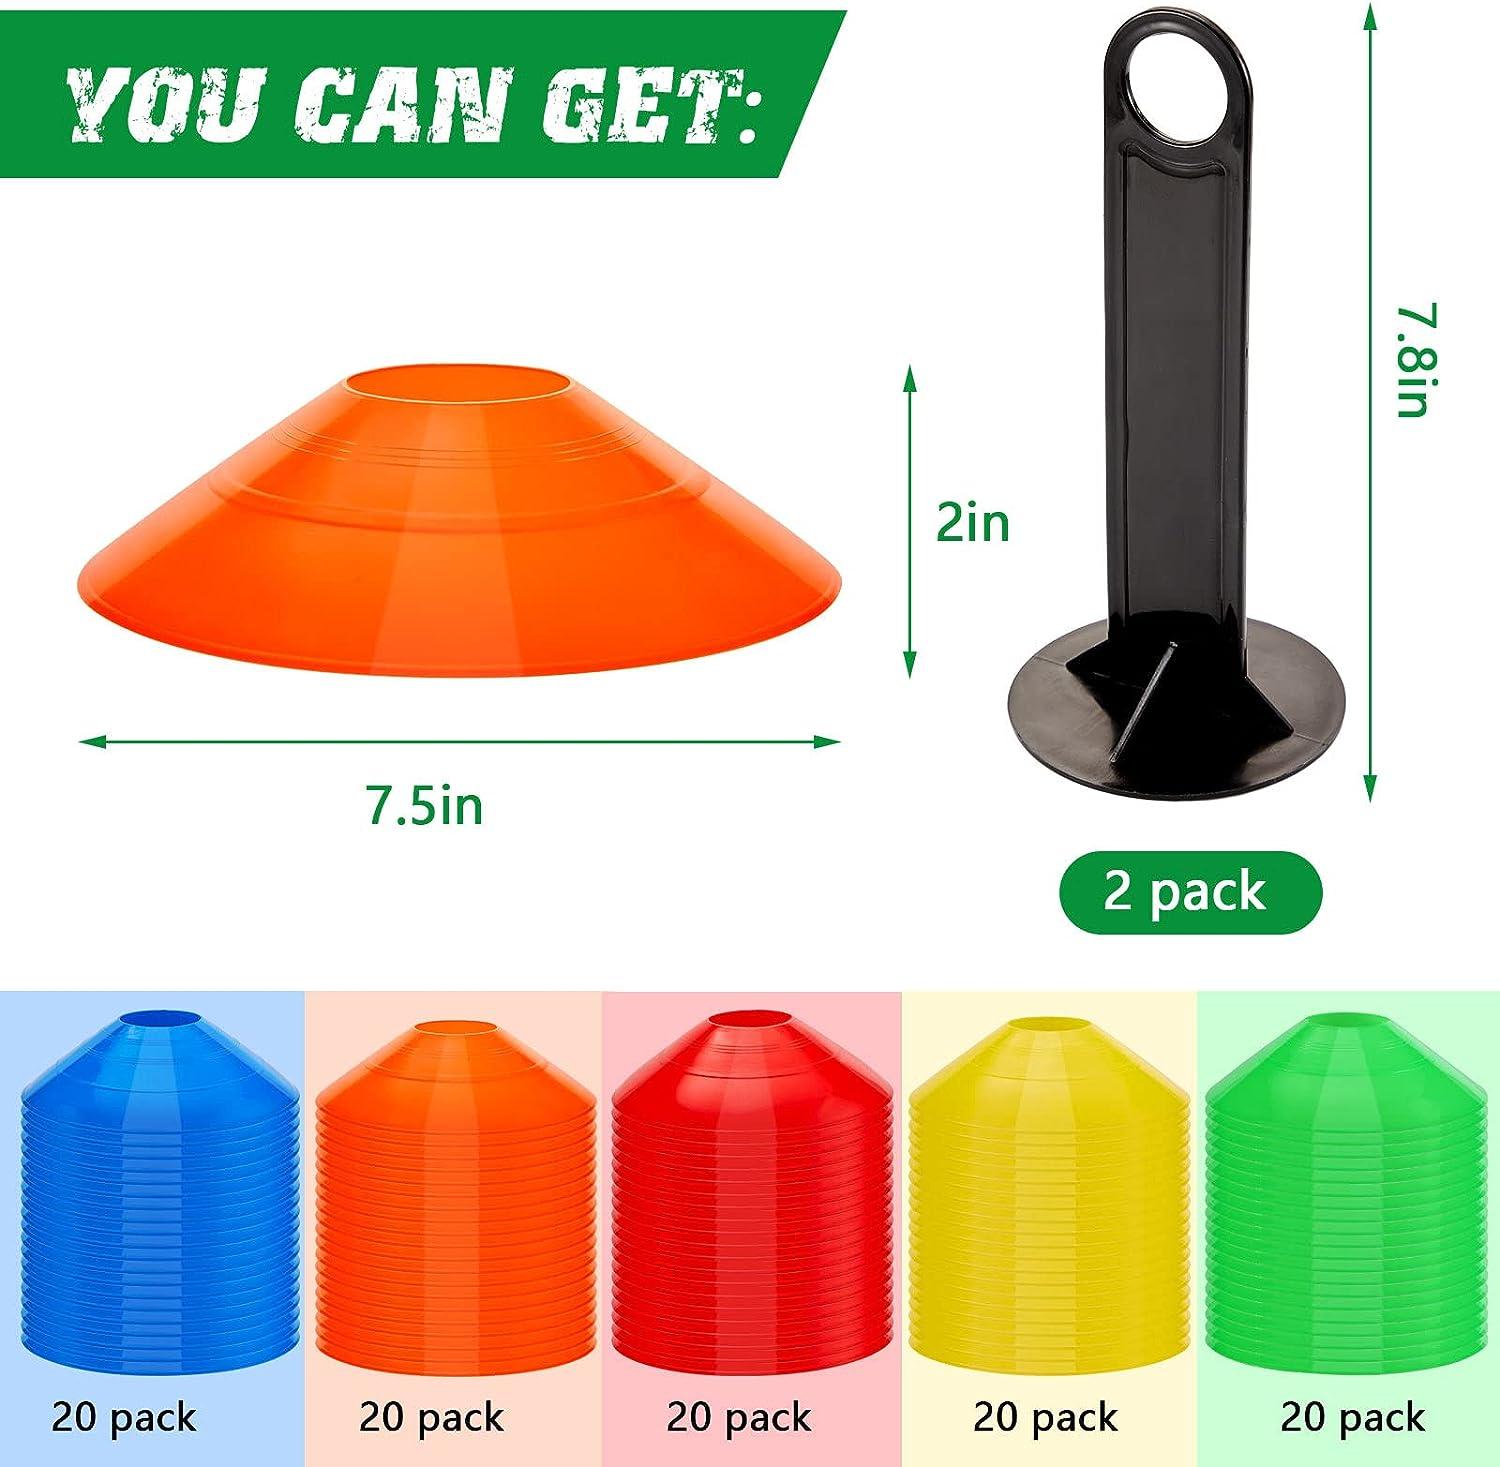 football cones sizes, football cones sizes Suppliers and Manufacturers at